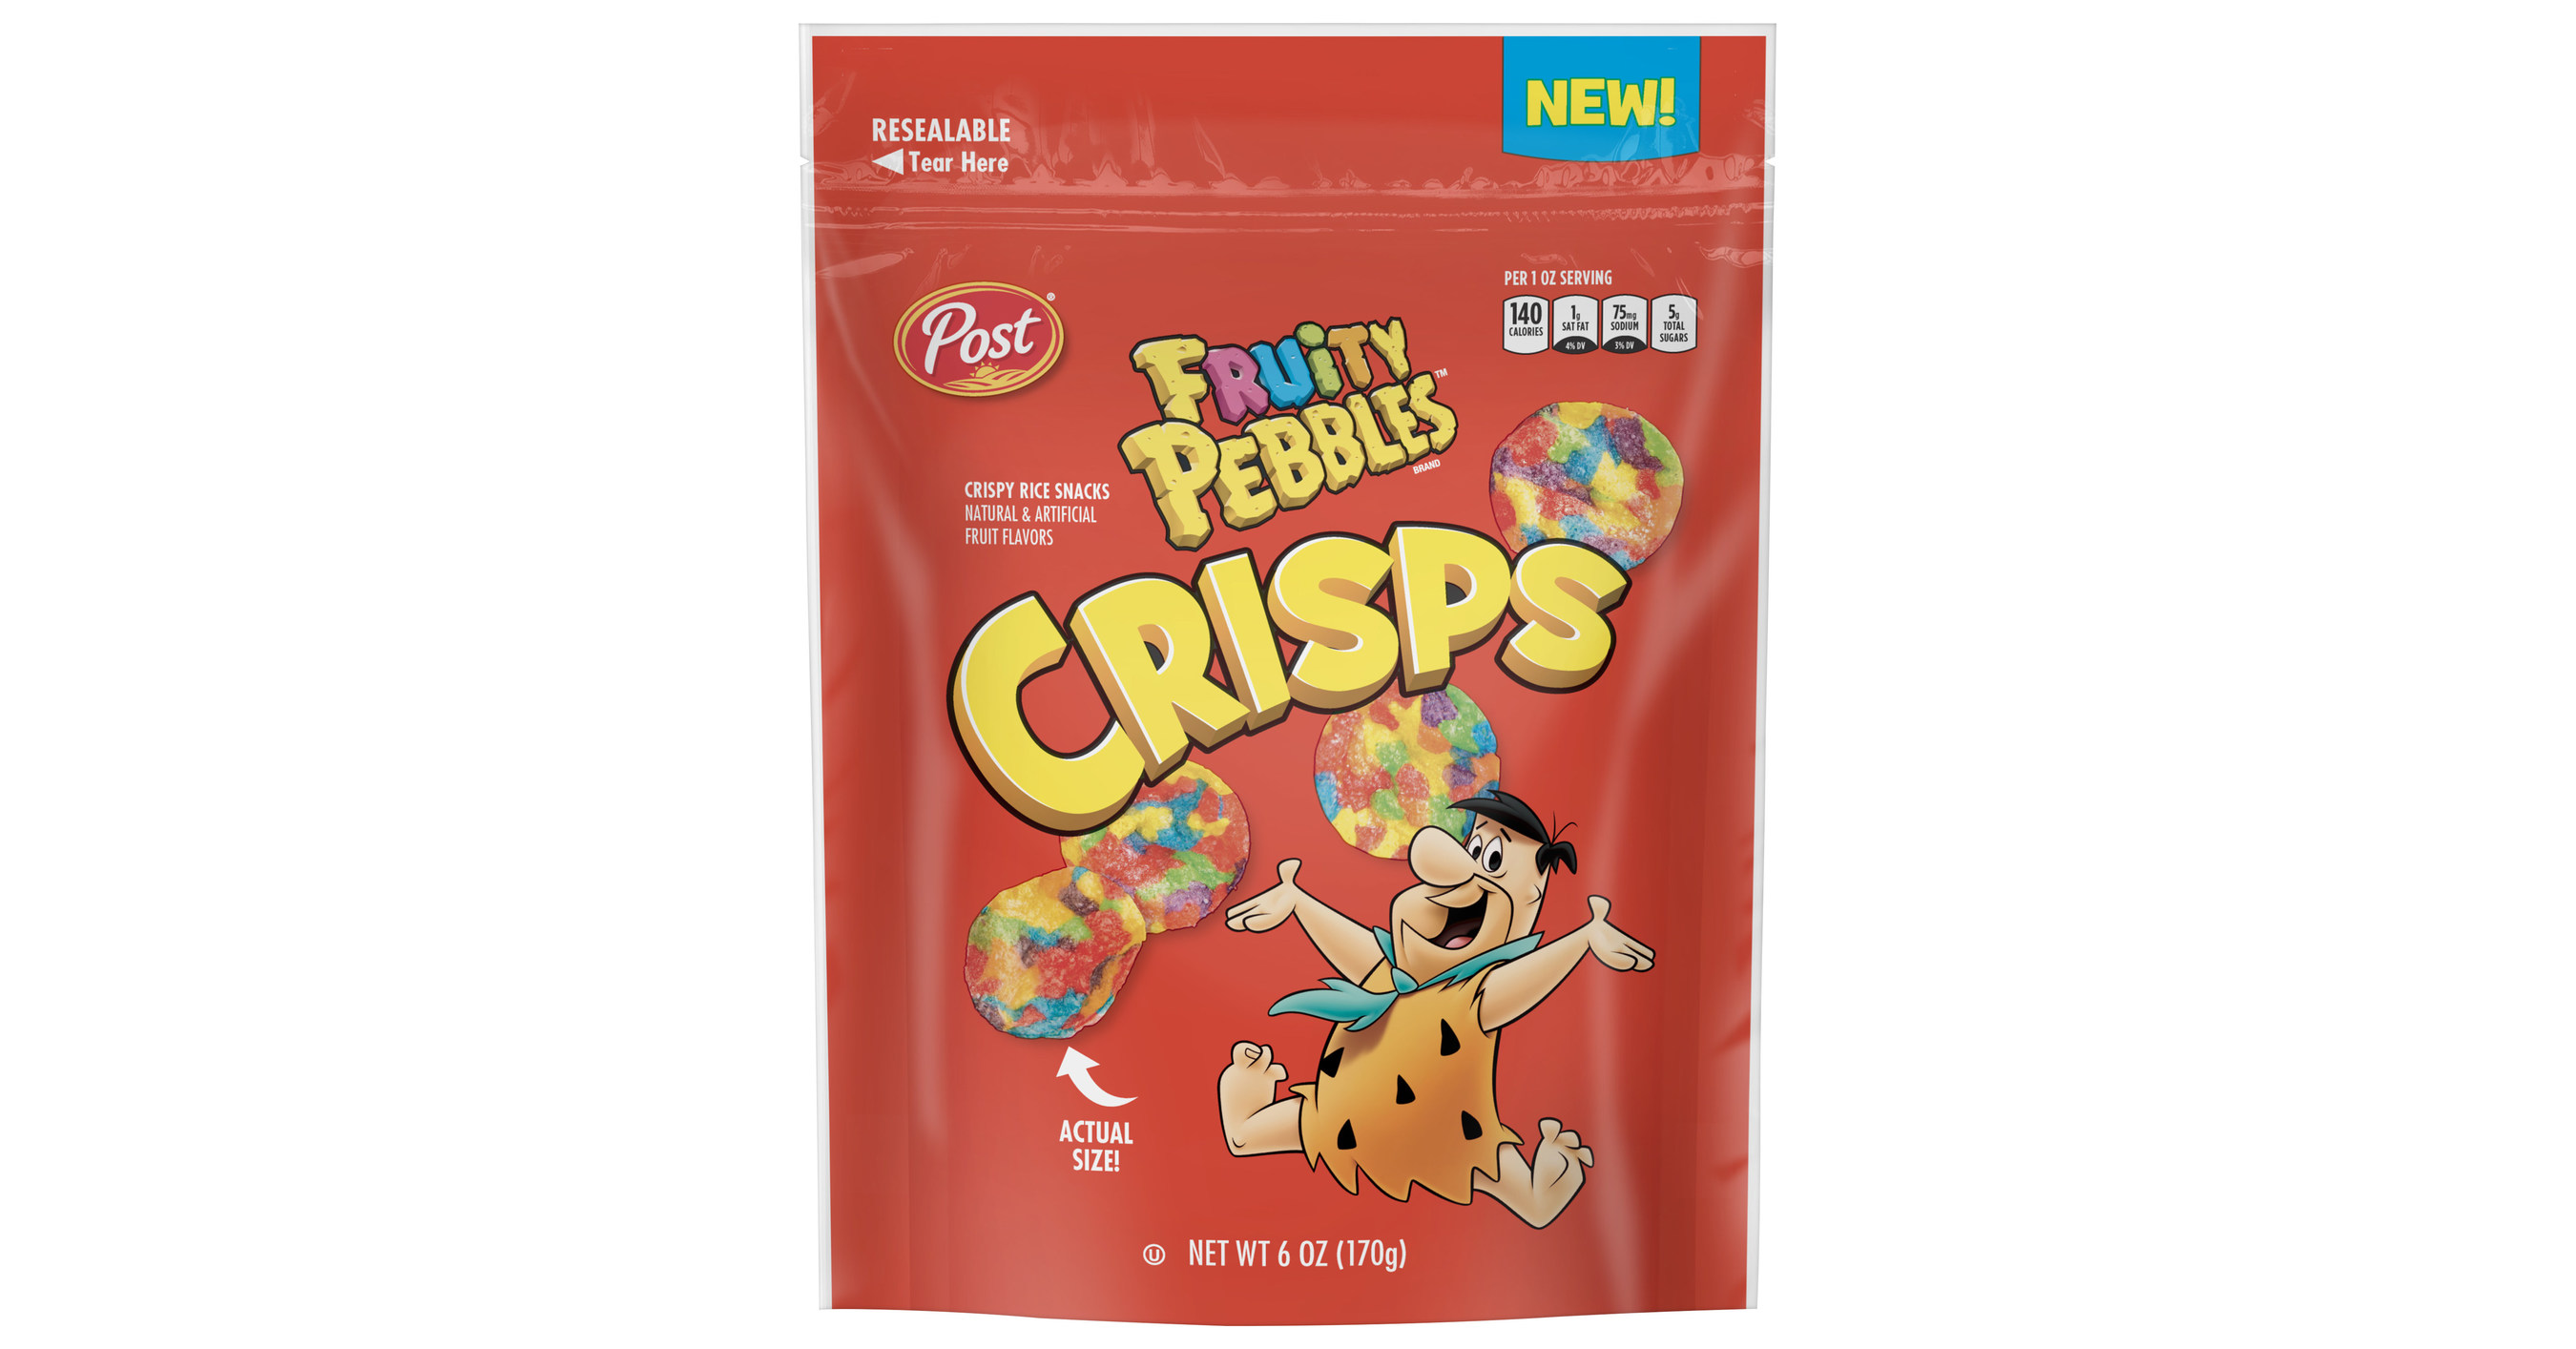 Introducing Sour Patch Kids® Flavored Cereal - Post Consumer Brands